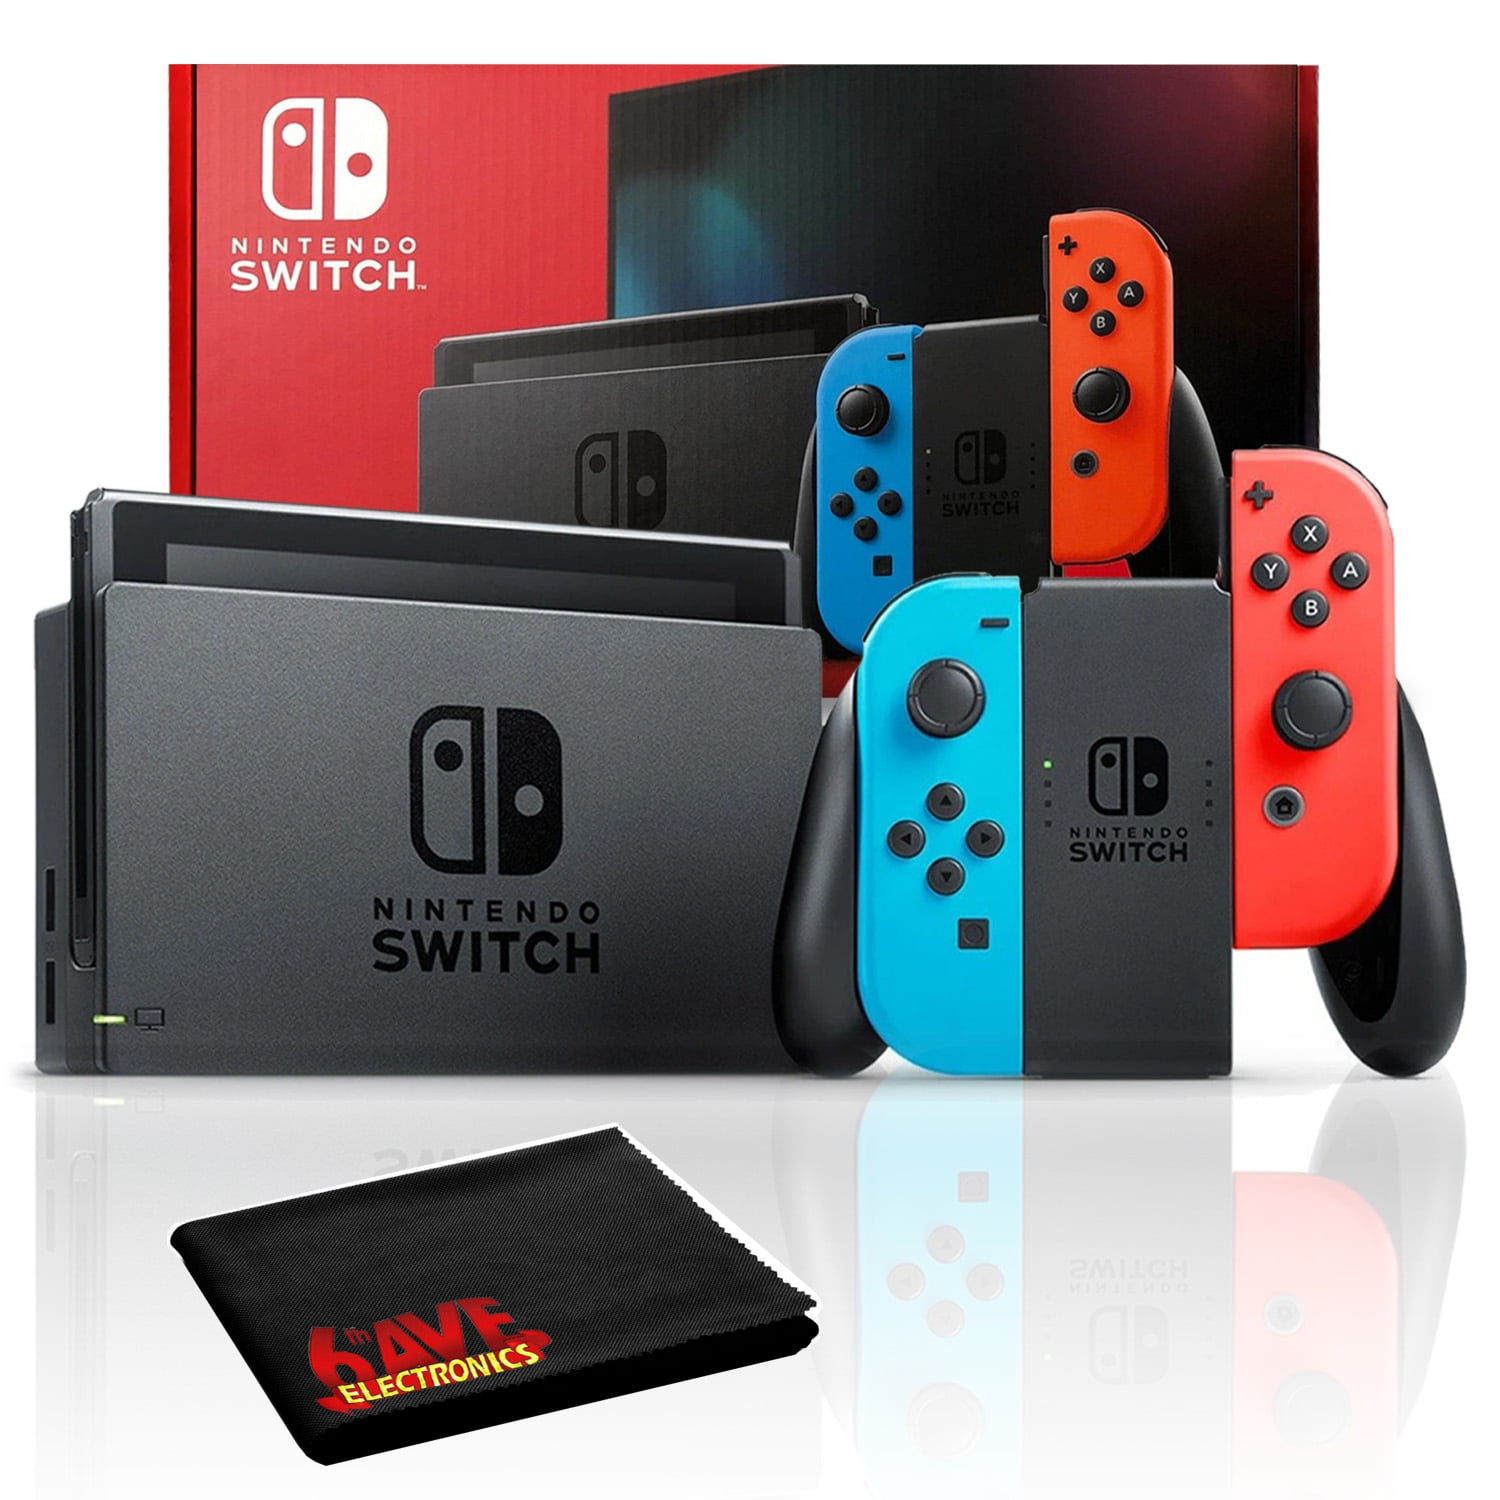 Nintendo Switch with Neon Blue/Red JoyCons Bundle Includes Extra Warranty